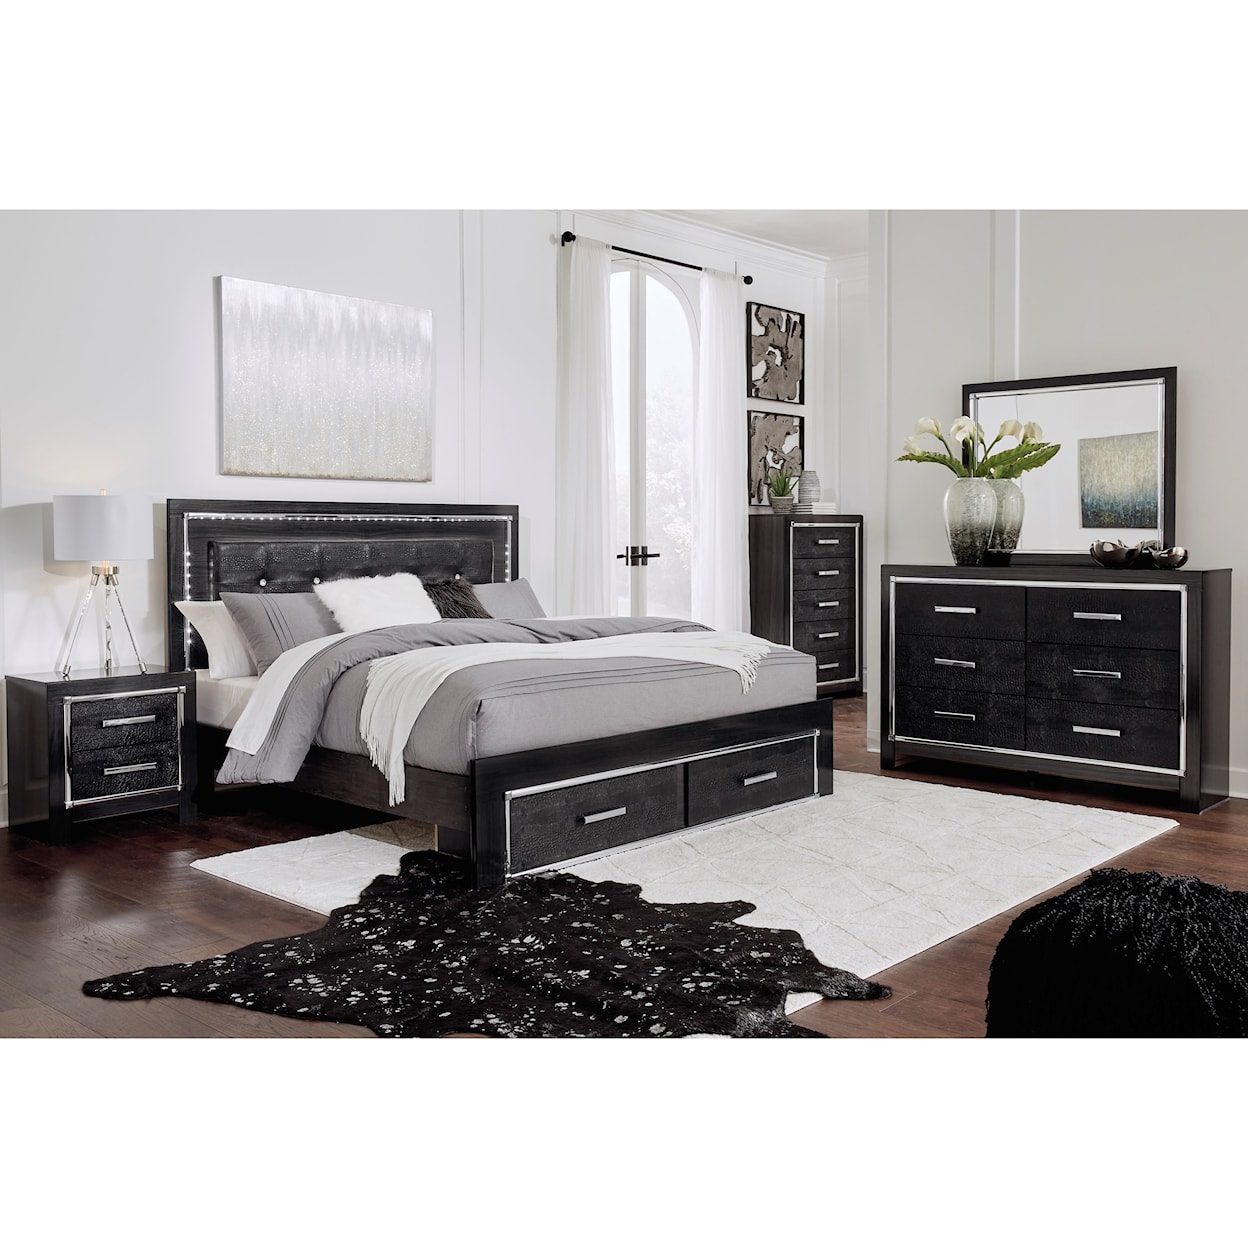 Signature Design by Ashley Kaydell King Uph Storage Bed with LED Lighting